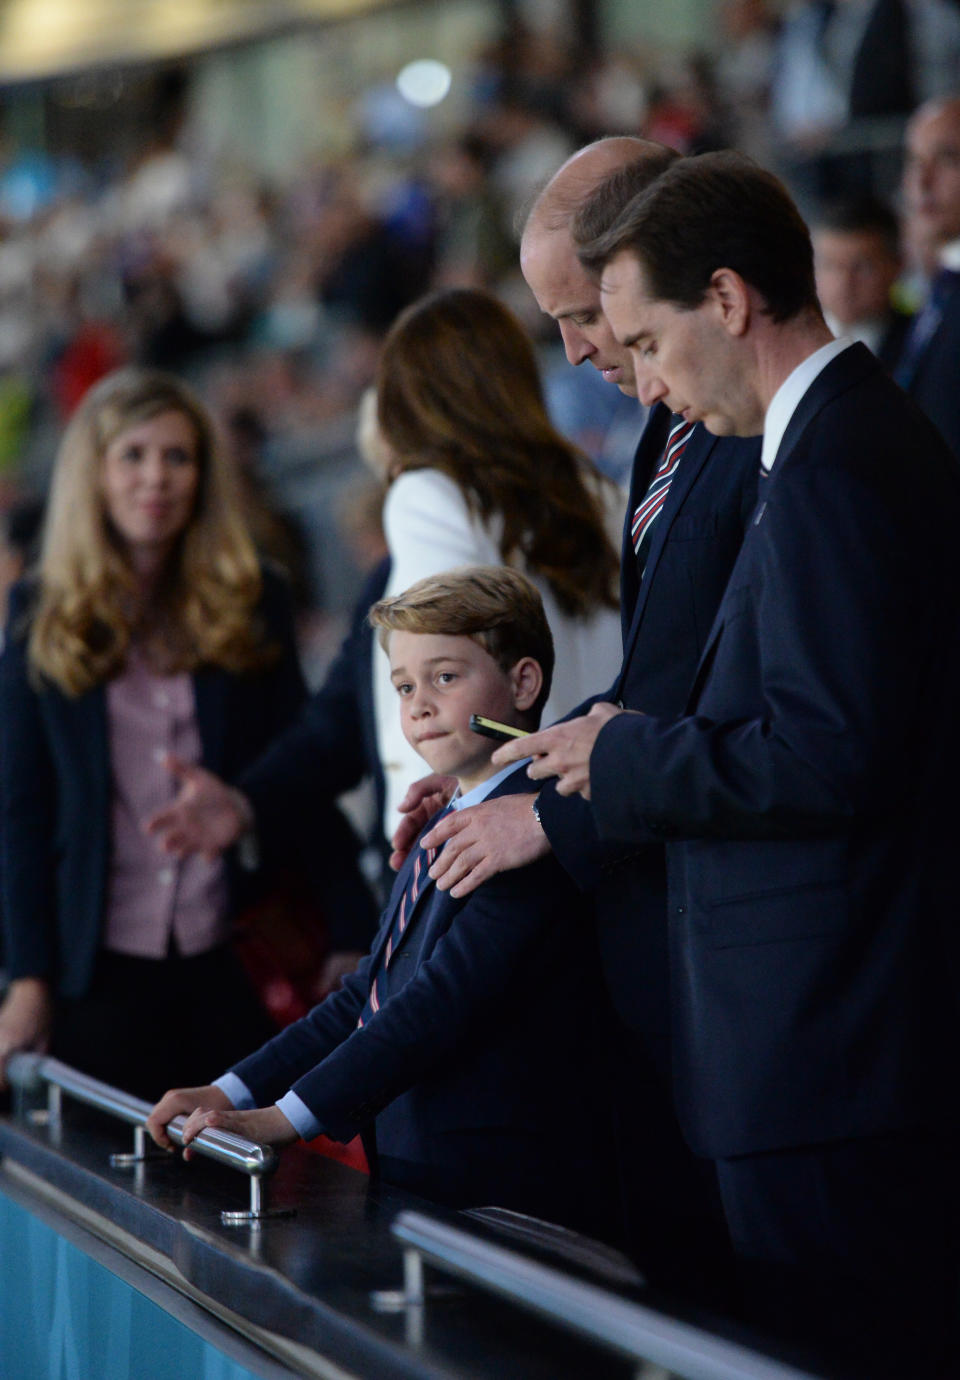 LONDON, ENGLAND - JULY 11: Prince George of Cambridge, Catherine, Duchess of Cambridge, and Prince William, Duke of Cambridge and President of the Football Association (FA) are seen in the stands prior to the UEFA Euro 2020 Championship Final between Italy and England at Wembley Stadium on July 11, 2021 in London, England. (Photo by Eamonn McCormack - UEFA/UEFA via Getty Images)